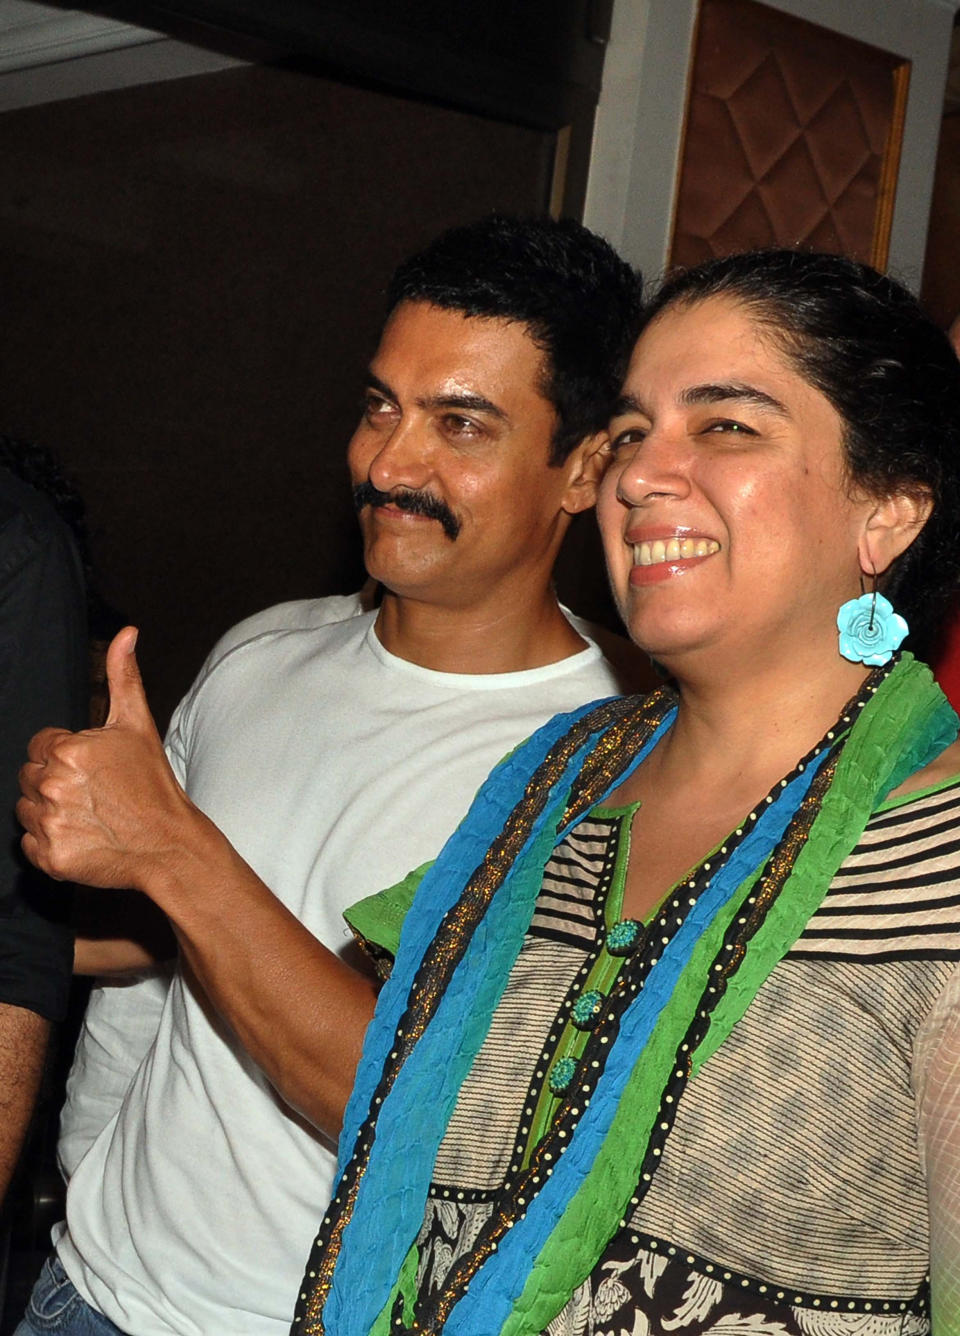 Indian Bollywood film actor Aamir Khan (L) and his first and former wife Reena Dutta attend the tenth anniversary celebration party of Hindi film 'Lagaan' in Mumbai on June 15, 2011.  PHOTO/STR (Photo credit should read STR/AFP via Getty Images)